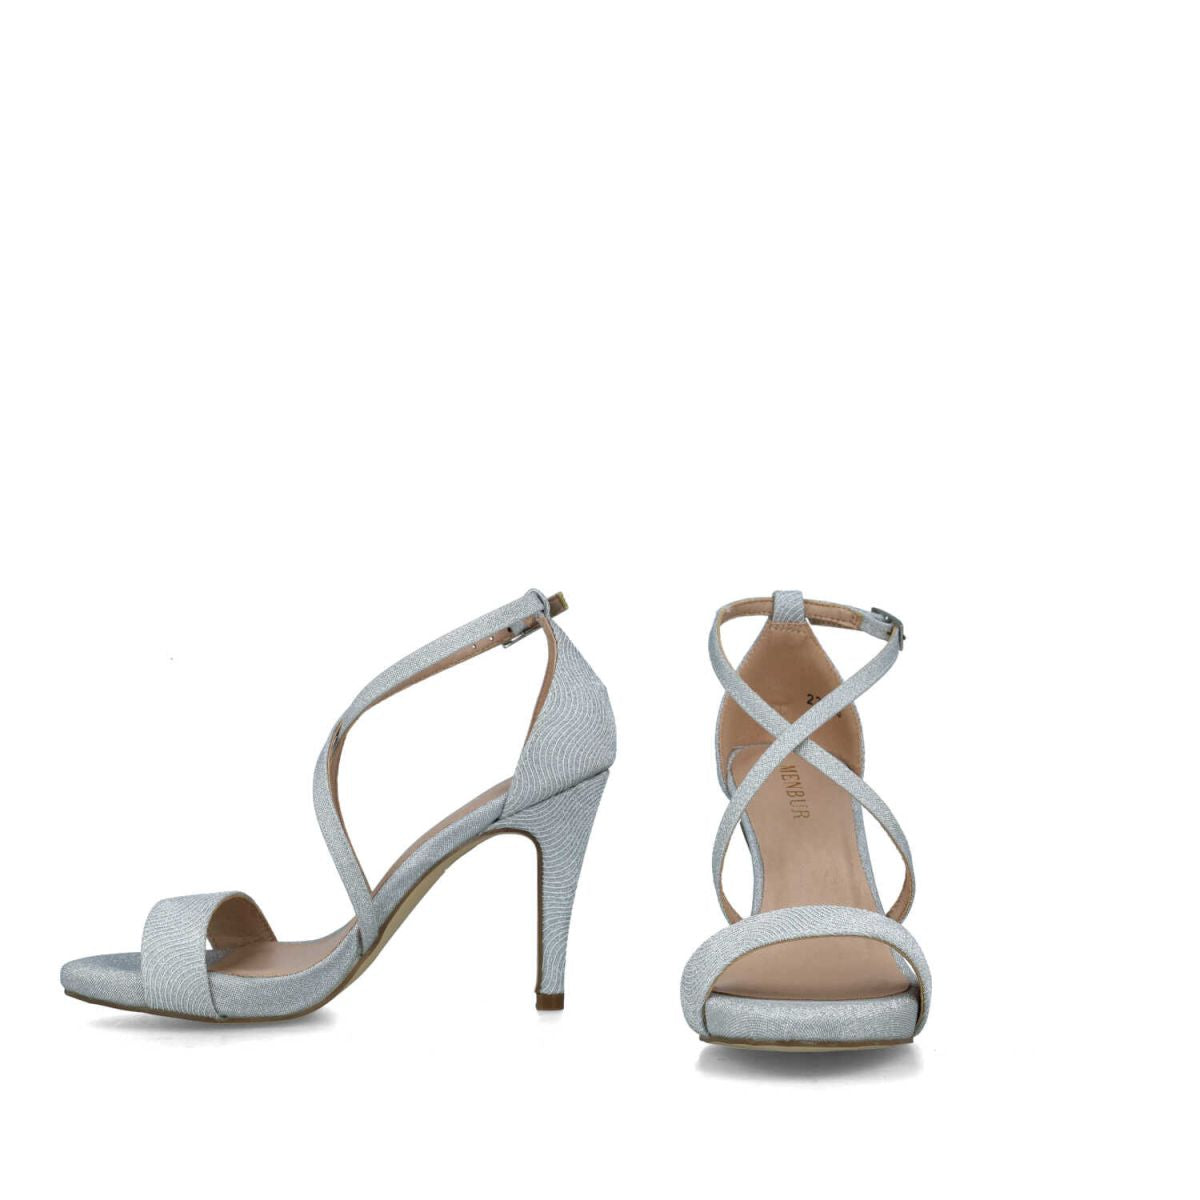 Frontal view of the Silver Strappy Sandals.